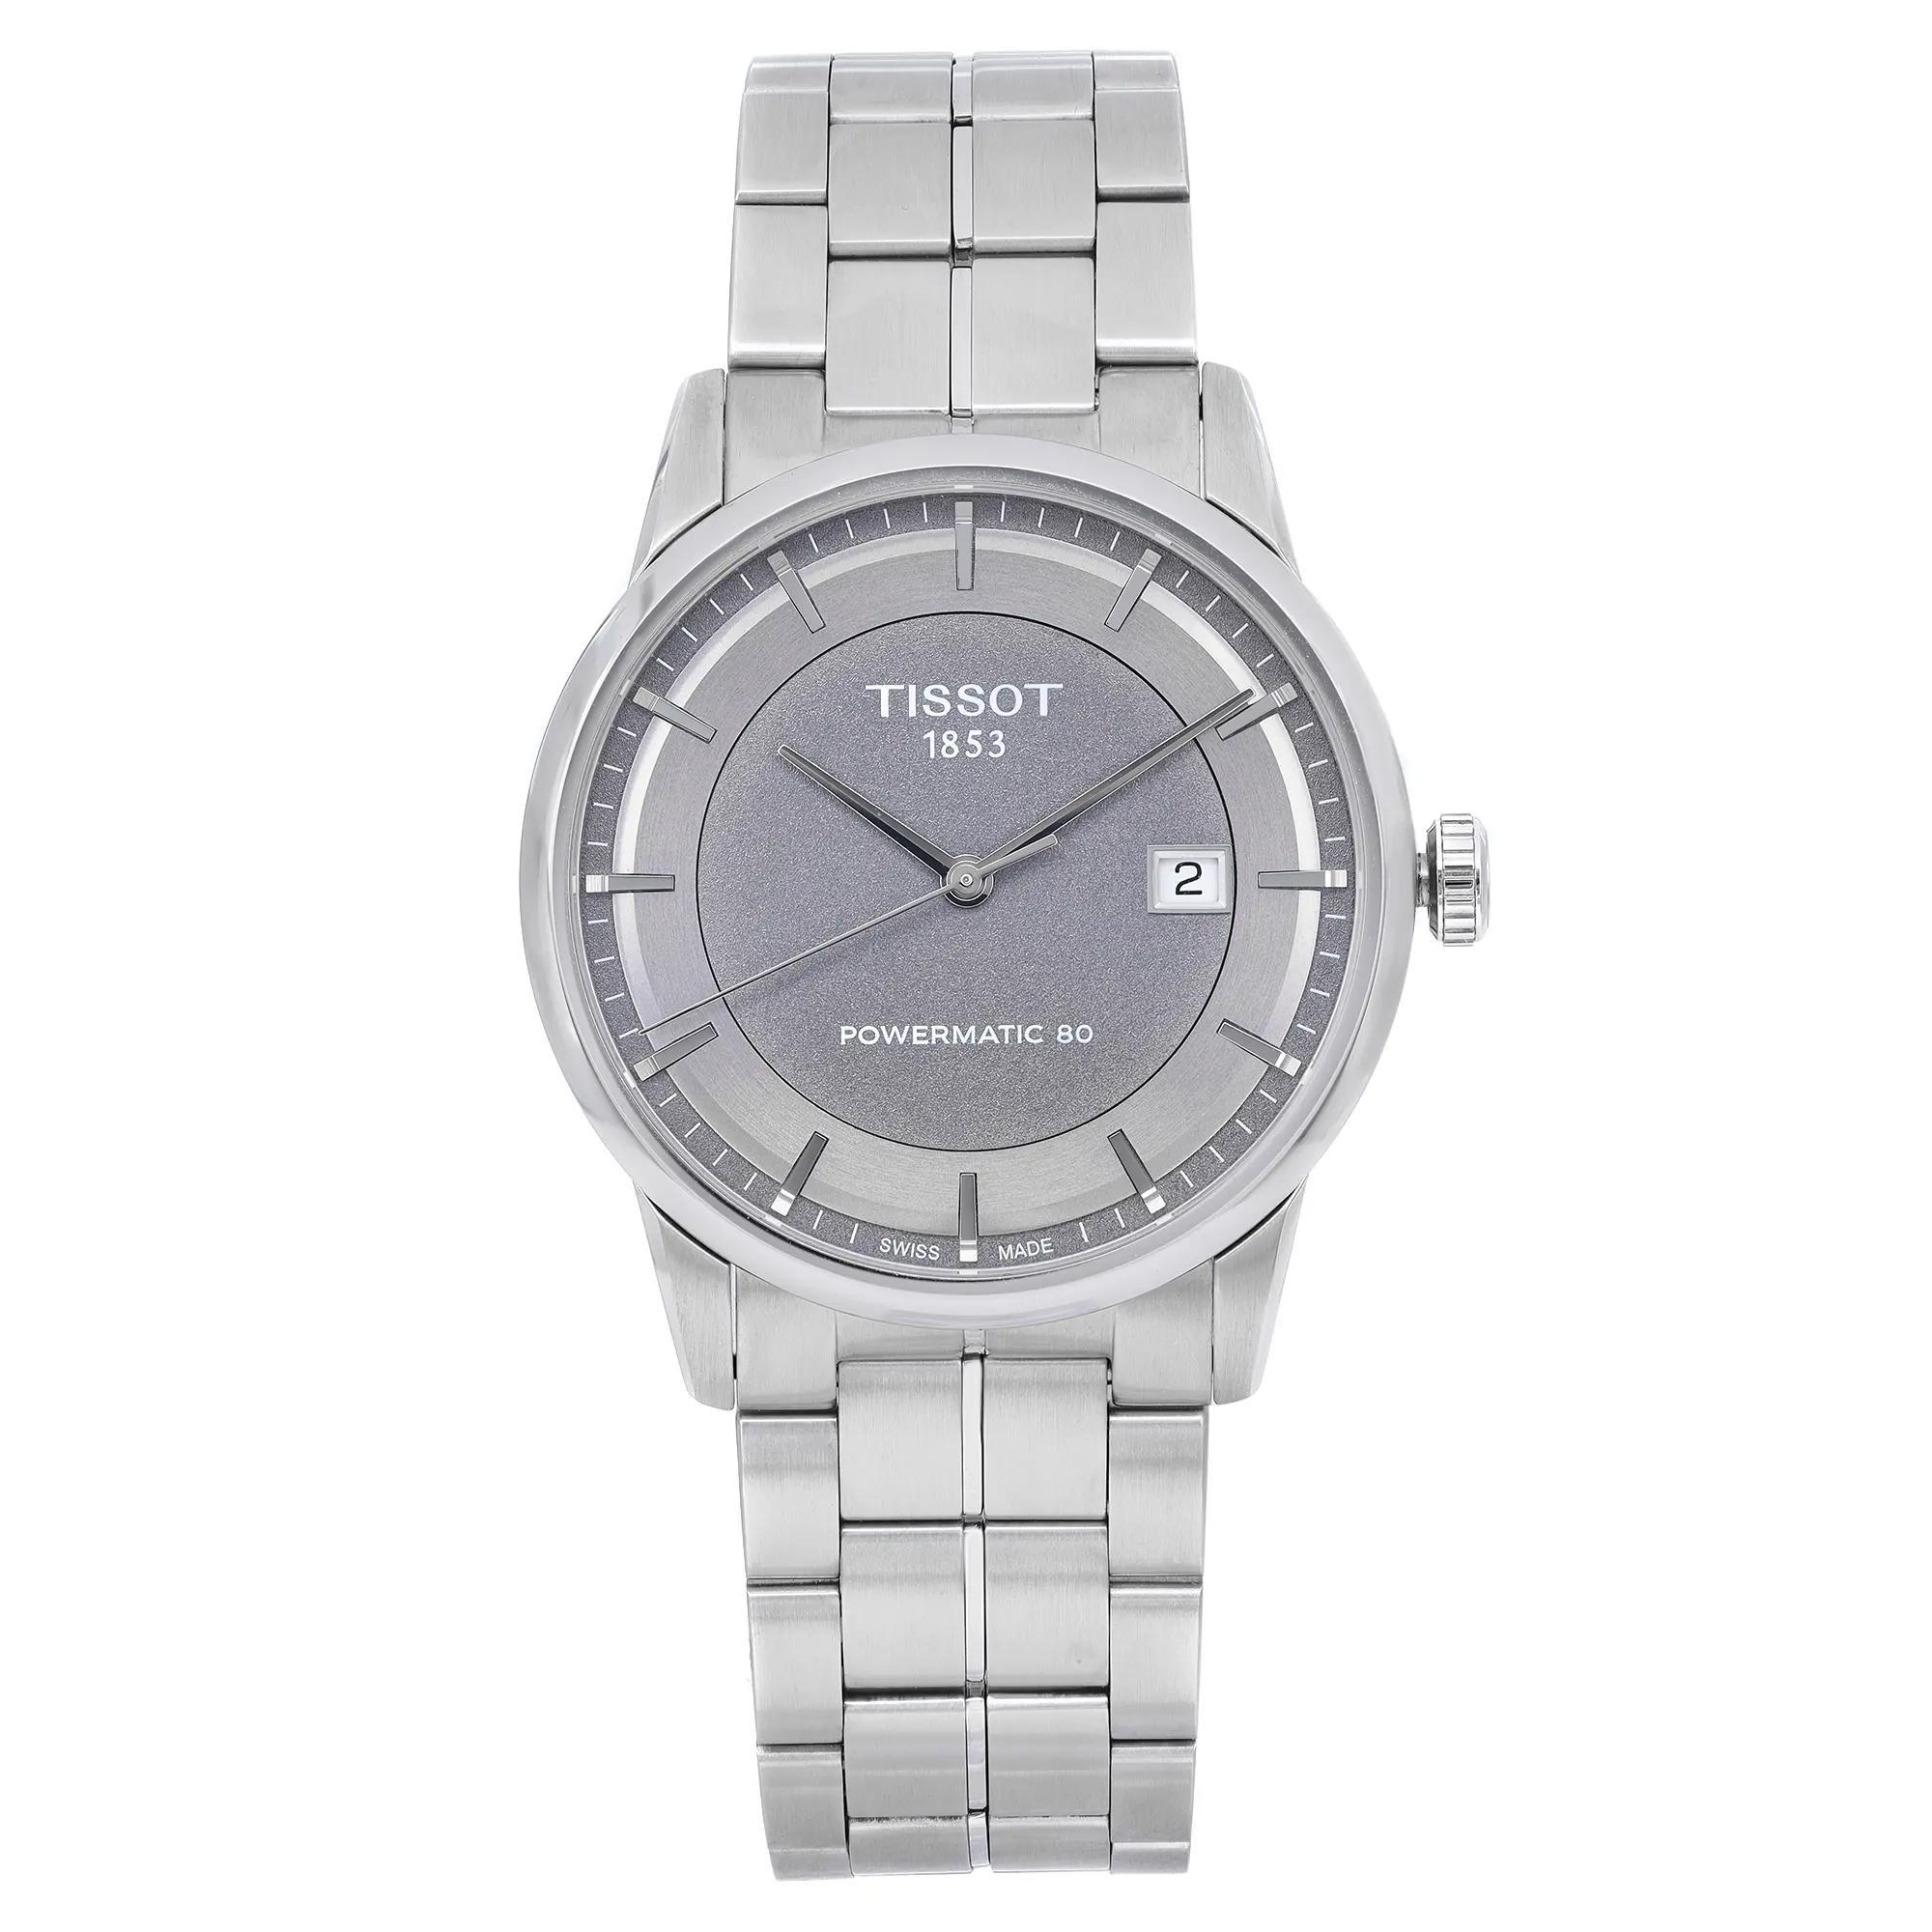 Tissot Powermatic 80 Anthracite Dial Steel Automatic Watch T086.407.11.061.00